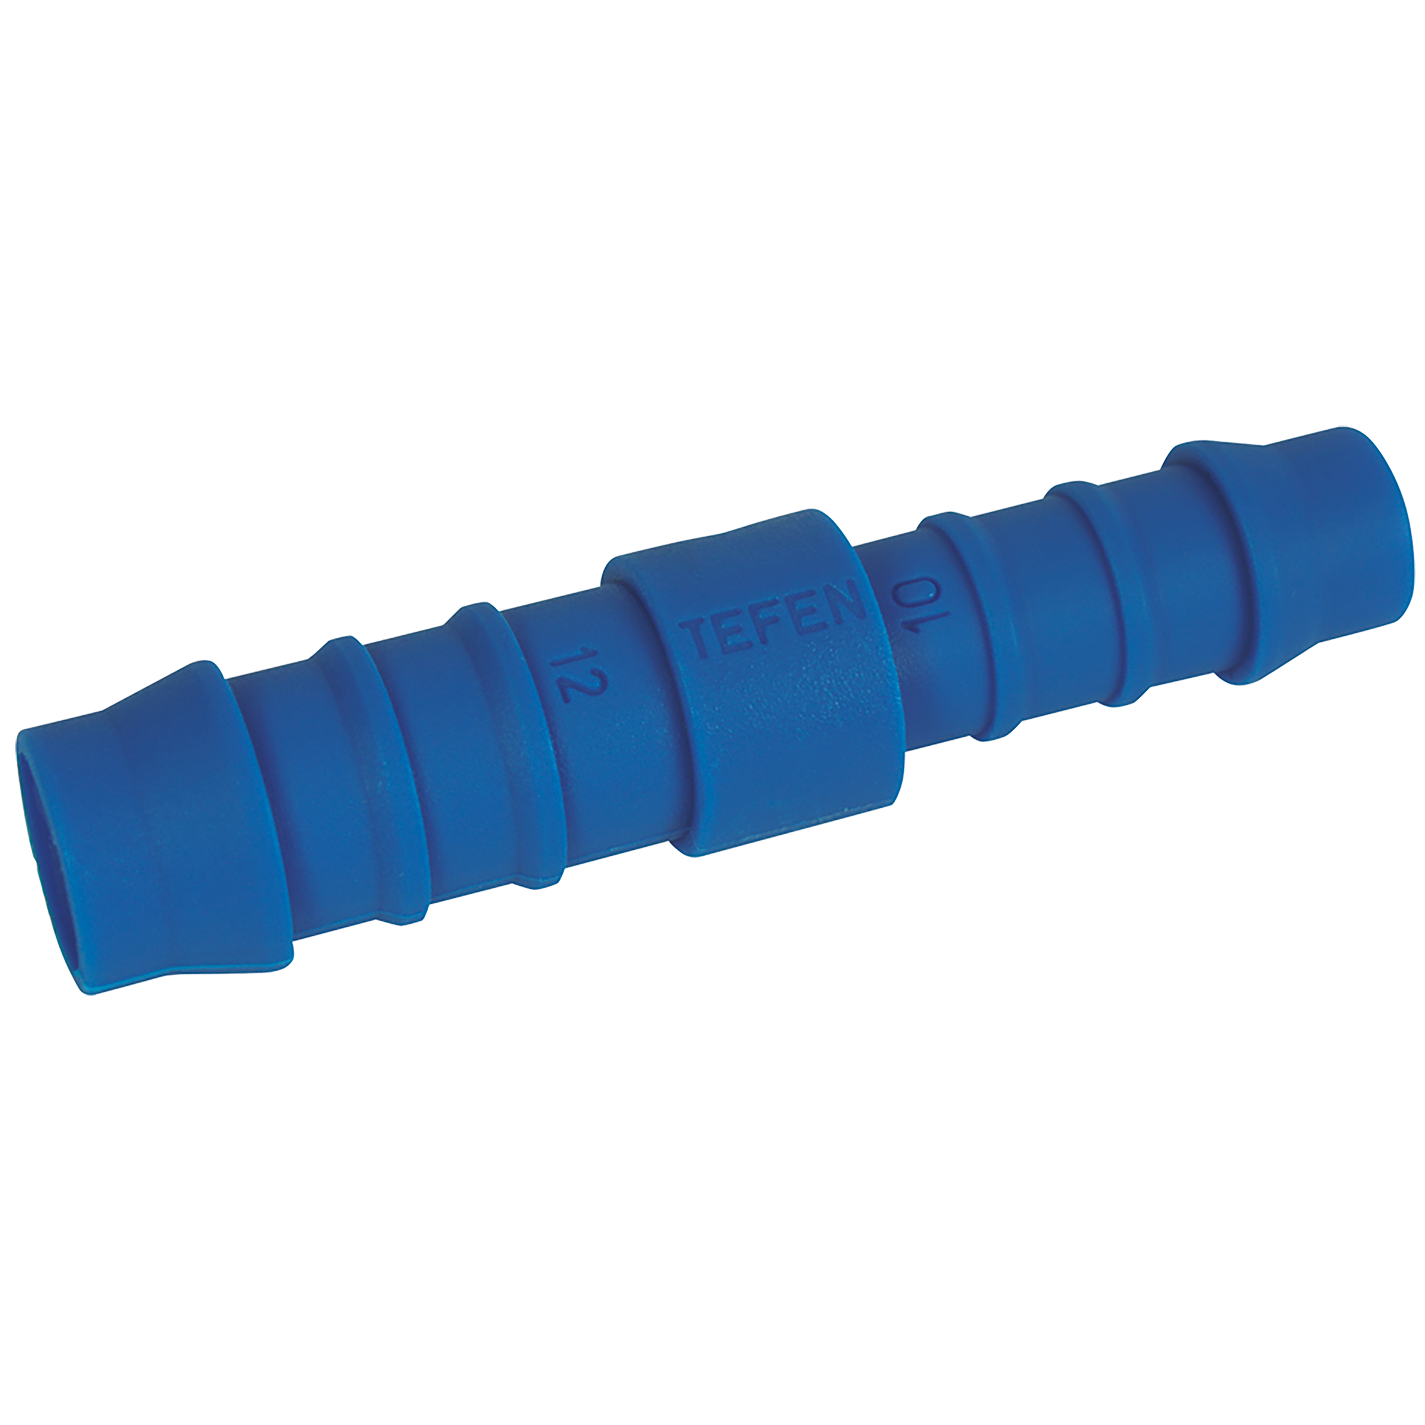 5/8" ID X 1/2" ID UNEQUAL HOSE REPAIRER